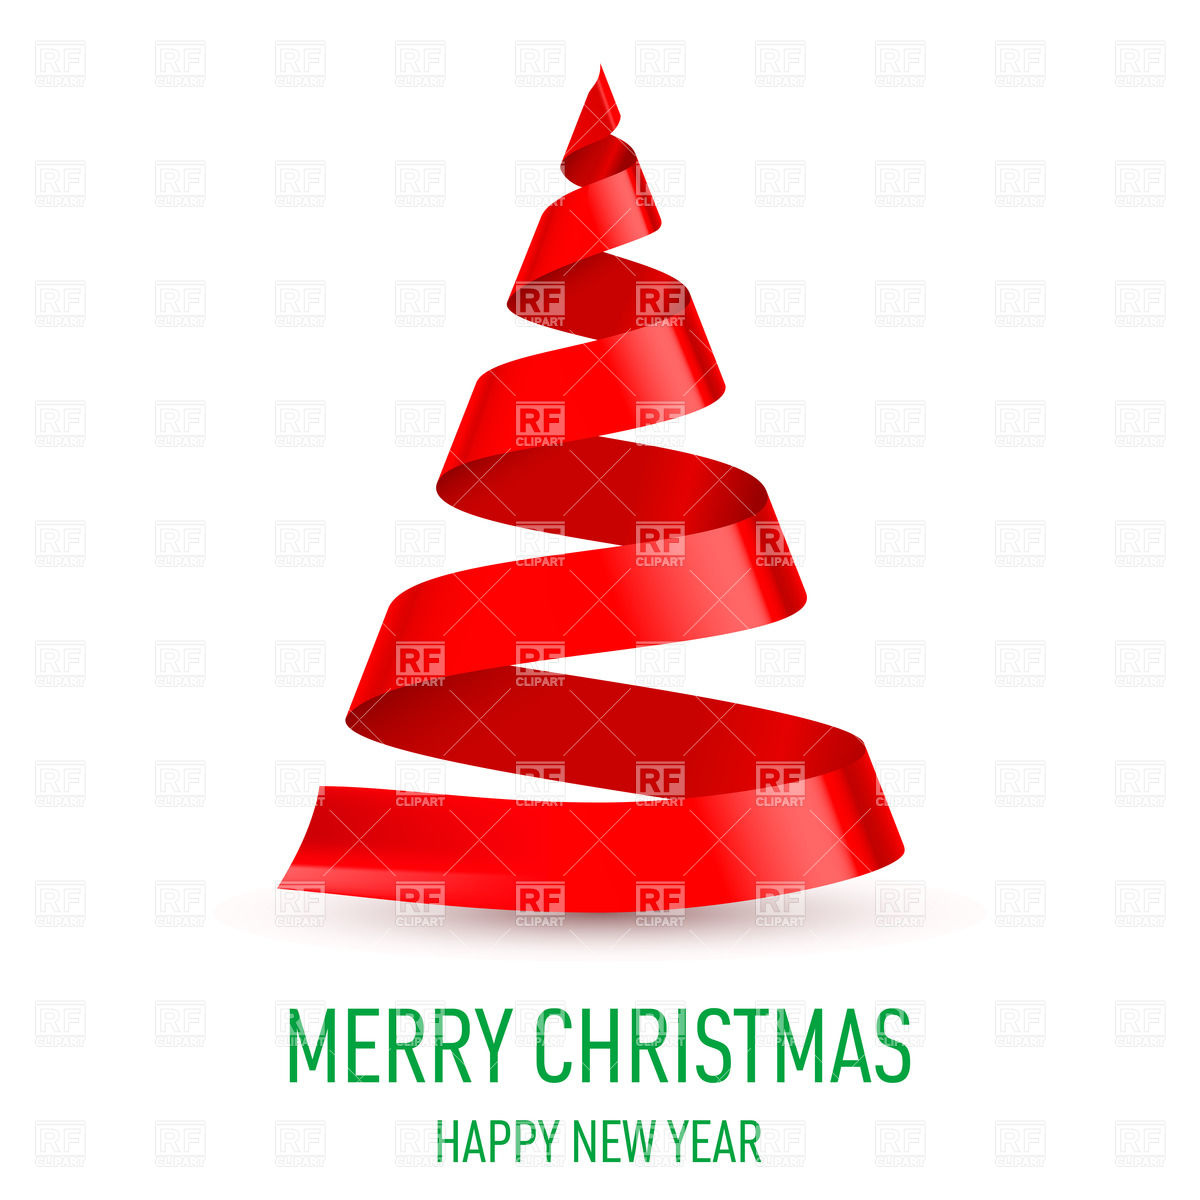 Christmas Tree Made Of Red Ribbon On White Background 25921 Design